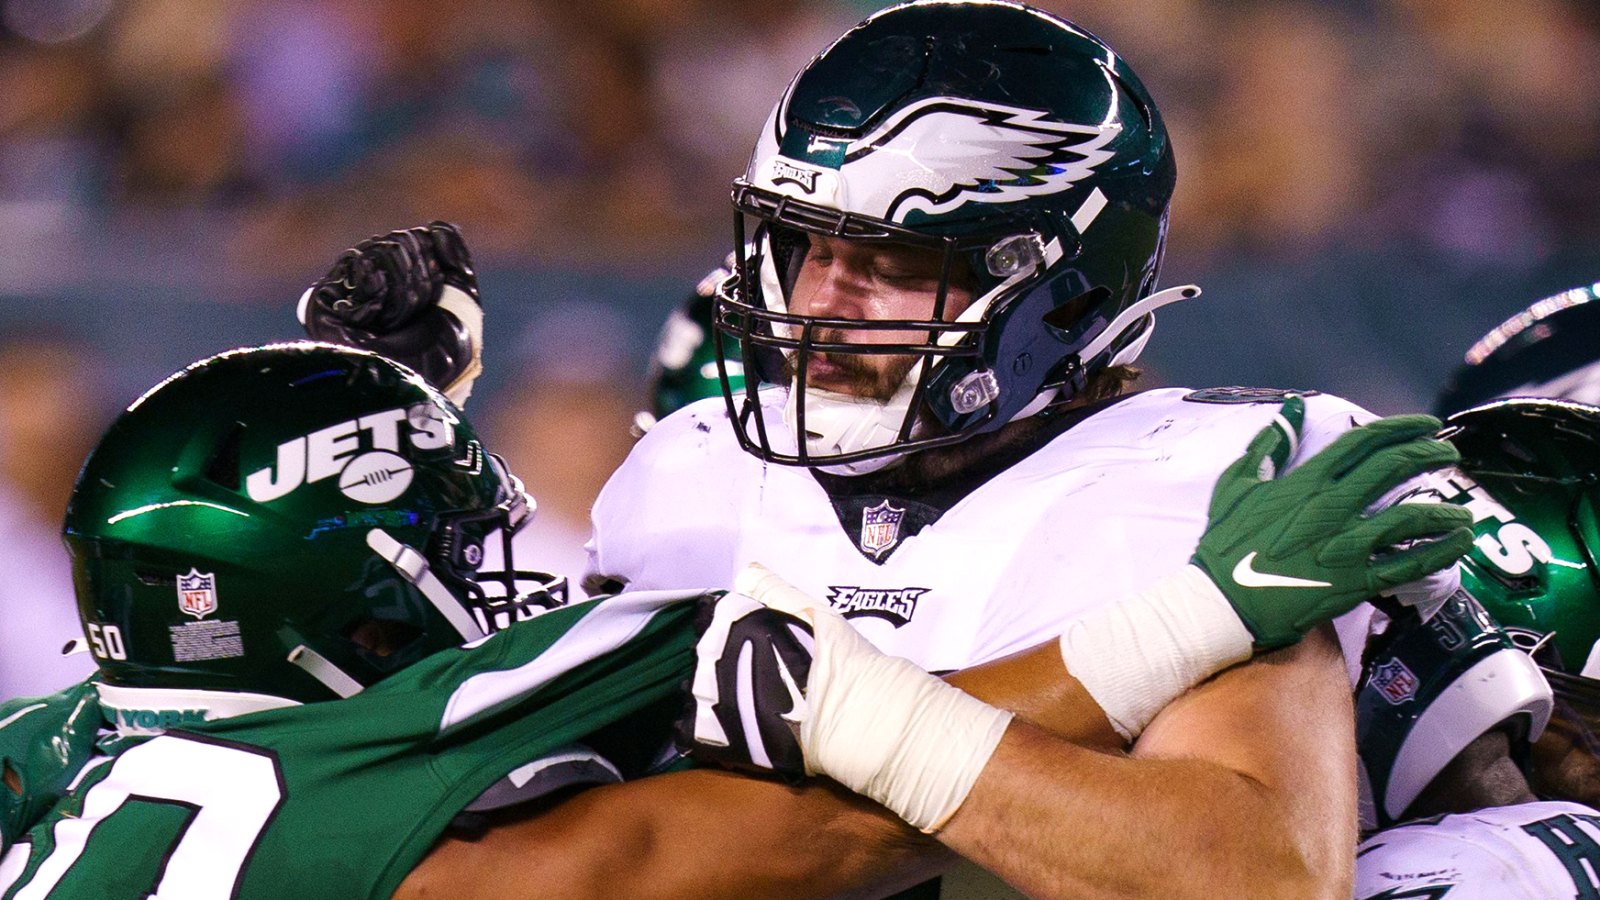 NFL Star Josh Sills Will Return to Philadelphia Eagles Active Roster After Rape Trial Acquittal